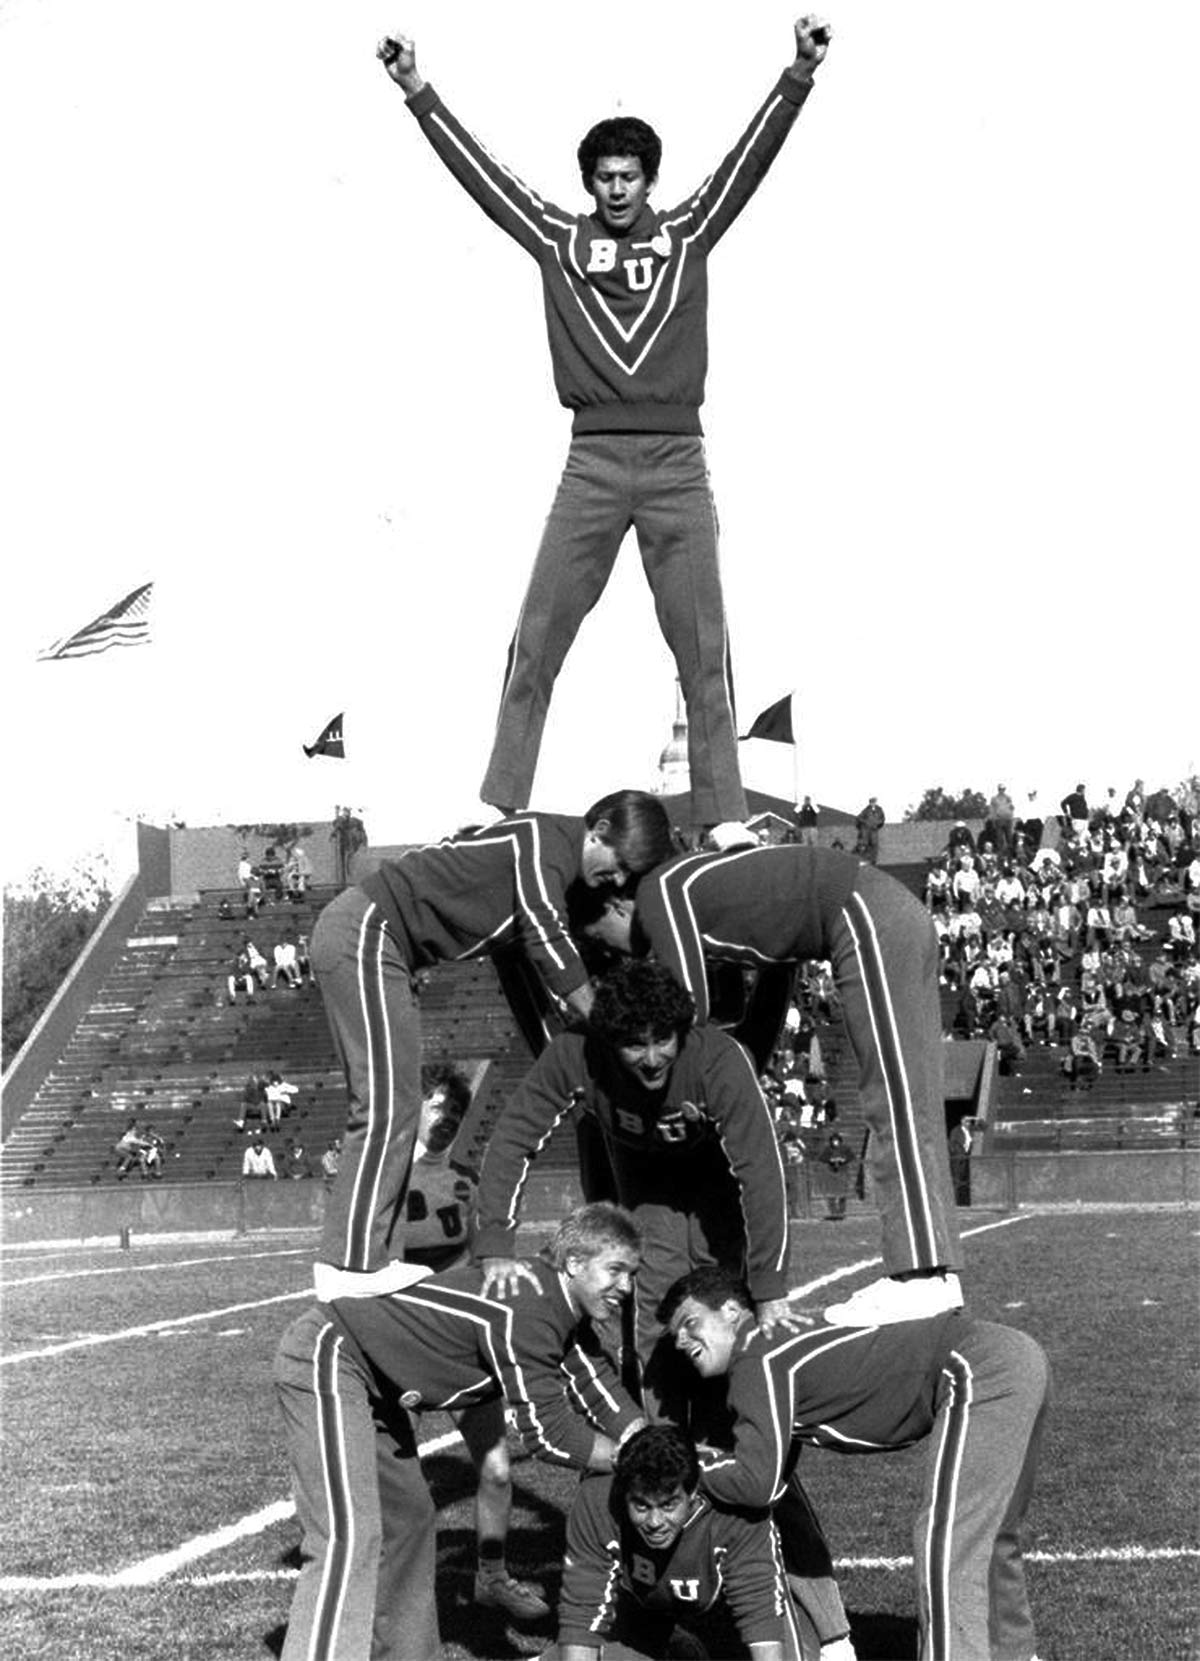 Vintage photograph of Bucknell male students doing a stacking formation